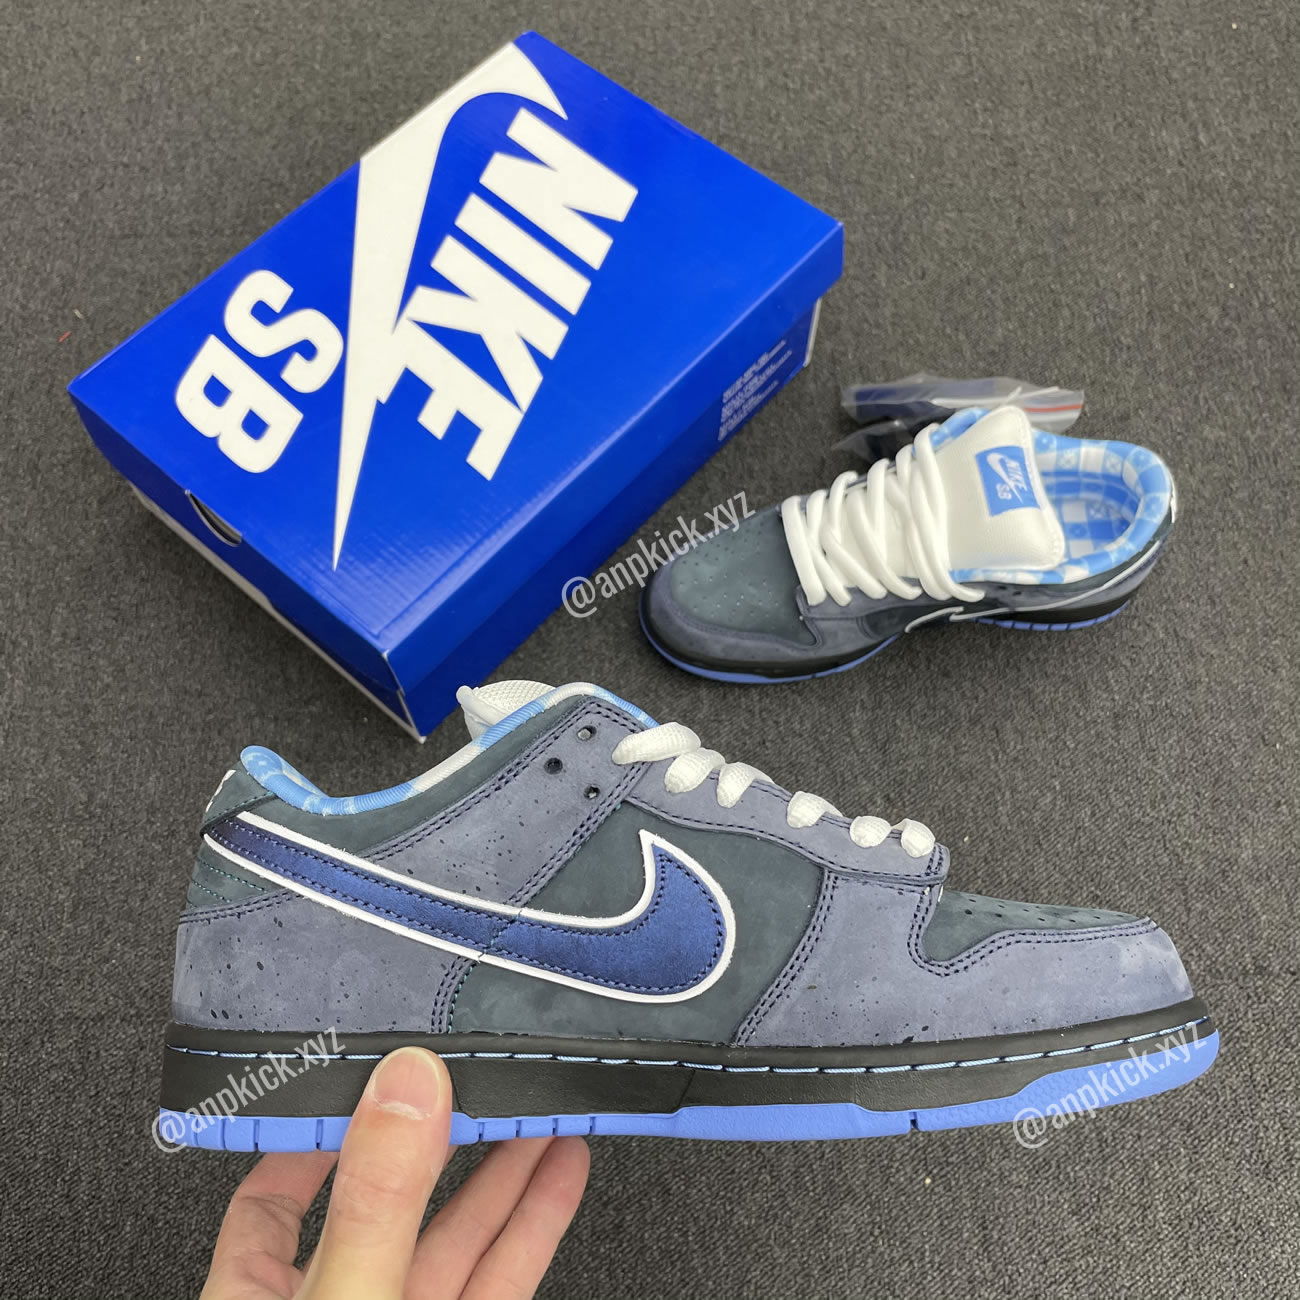 Anpkick Nike Sb Dunk Low Concepts Bluelobster 313170 342 (3) - newkick.org